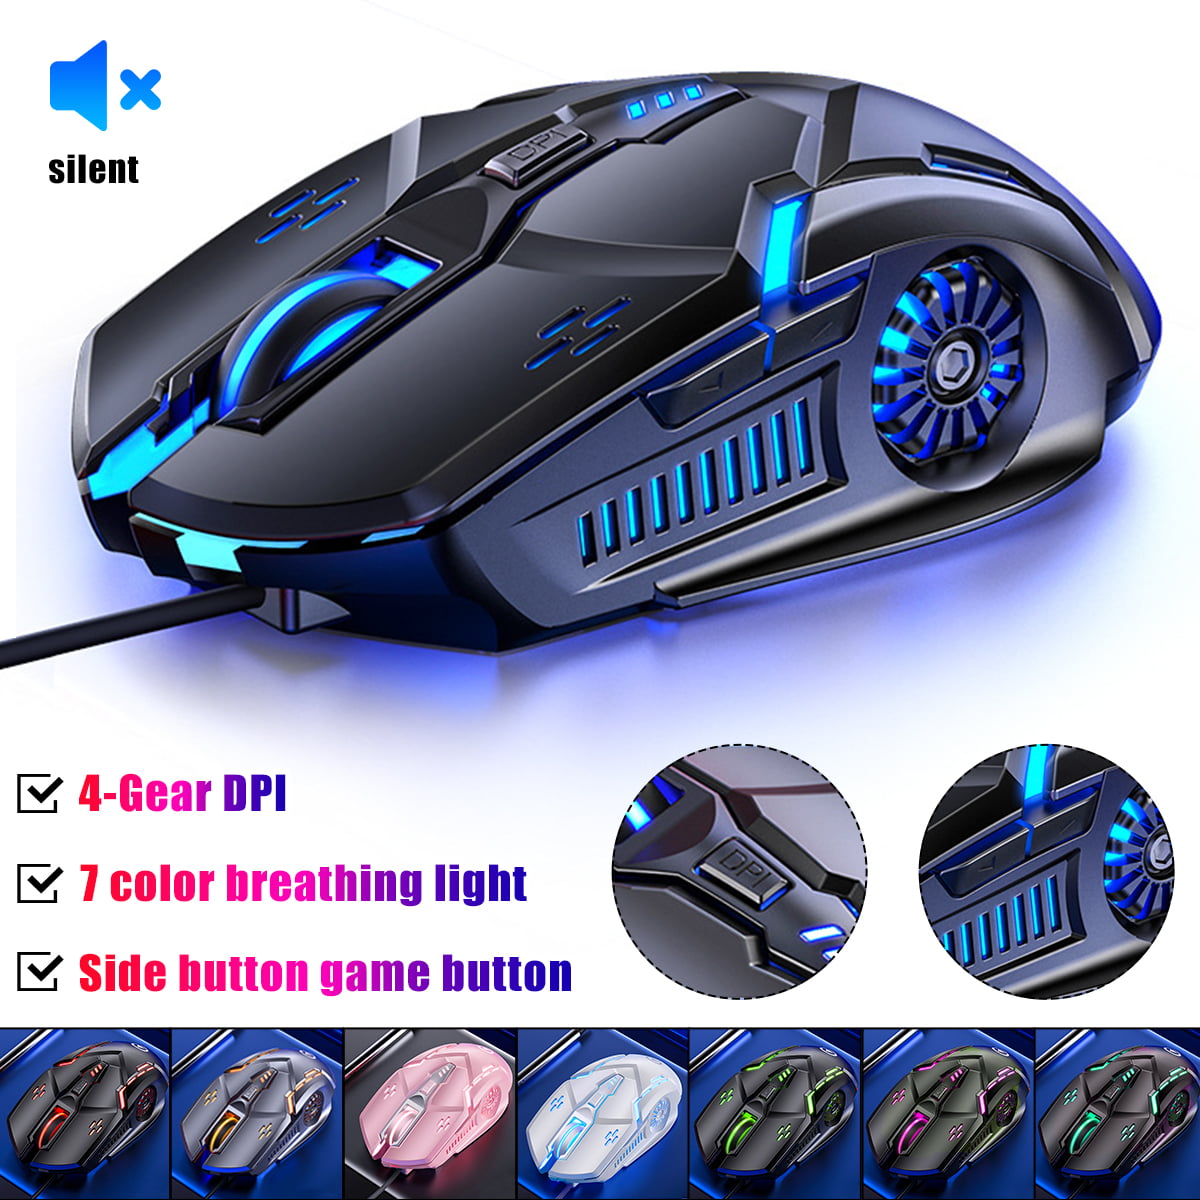 6 Buttons 3200DPI Adjustable DPI Optical USB Wired LED Breathing Gaming Mouse 